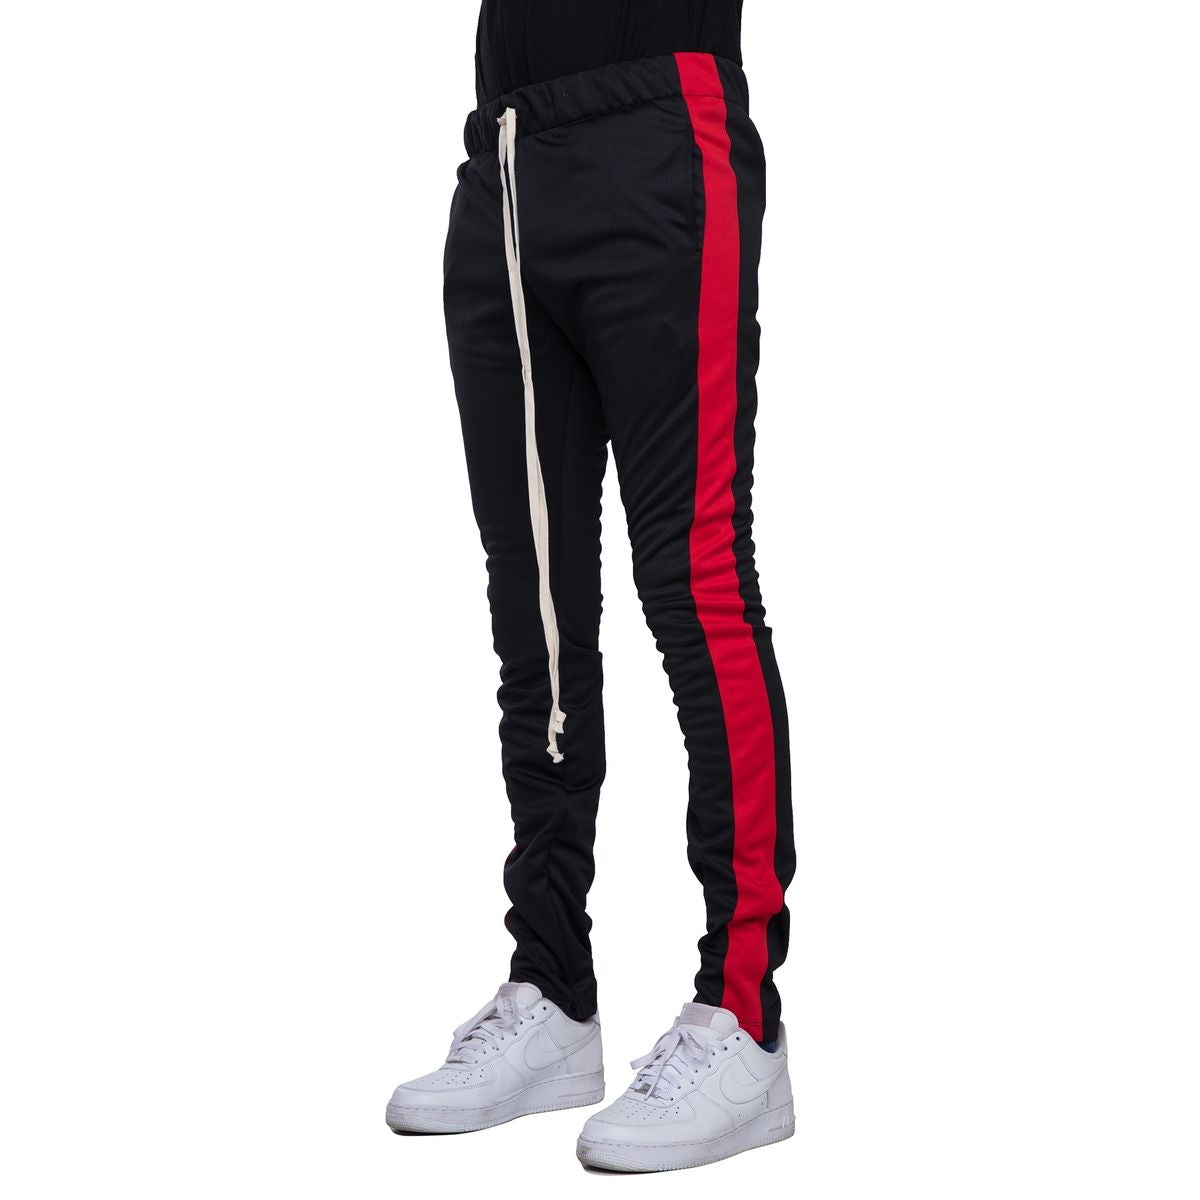 Track Pants In Black/Red